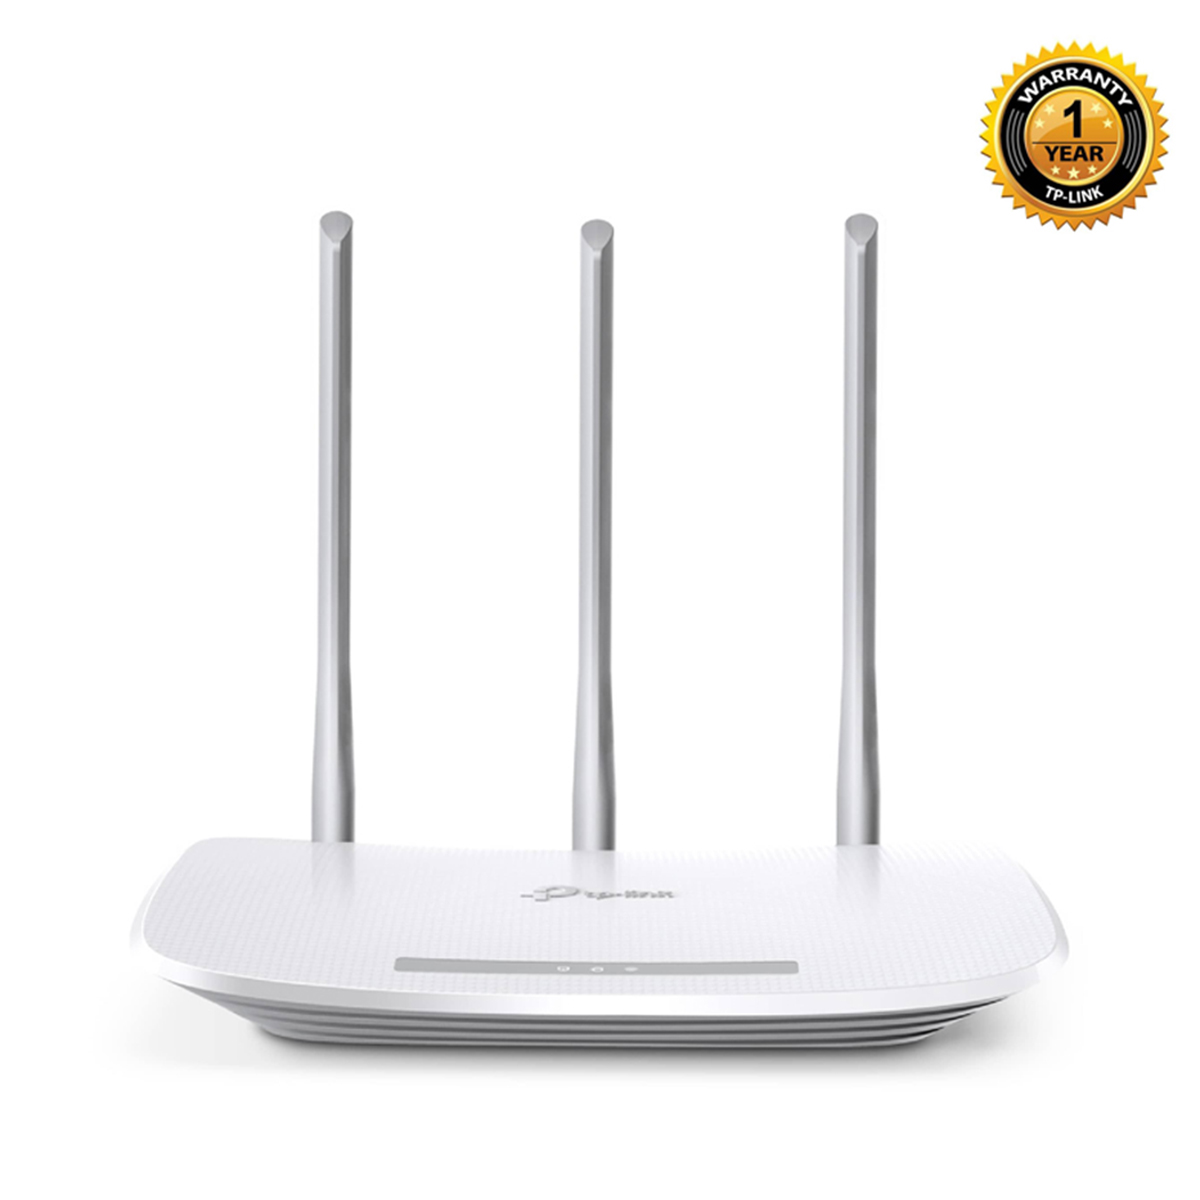 TP-Link TL-WR845N 300 Mbps Wireless Wi-Fi Router: Buy Online at ...